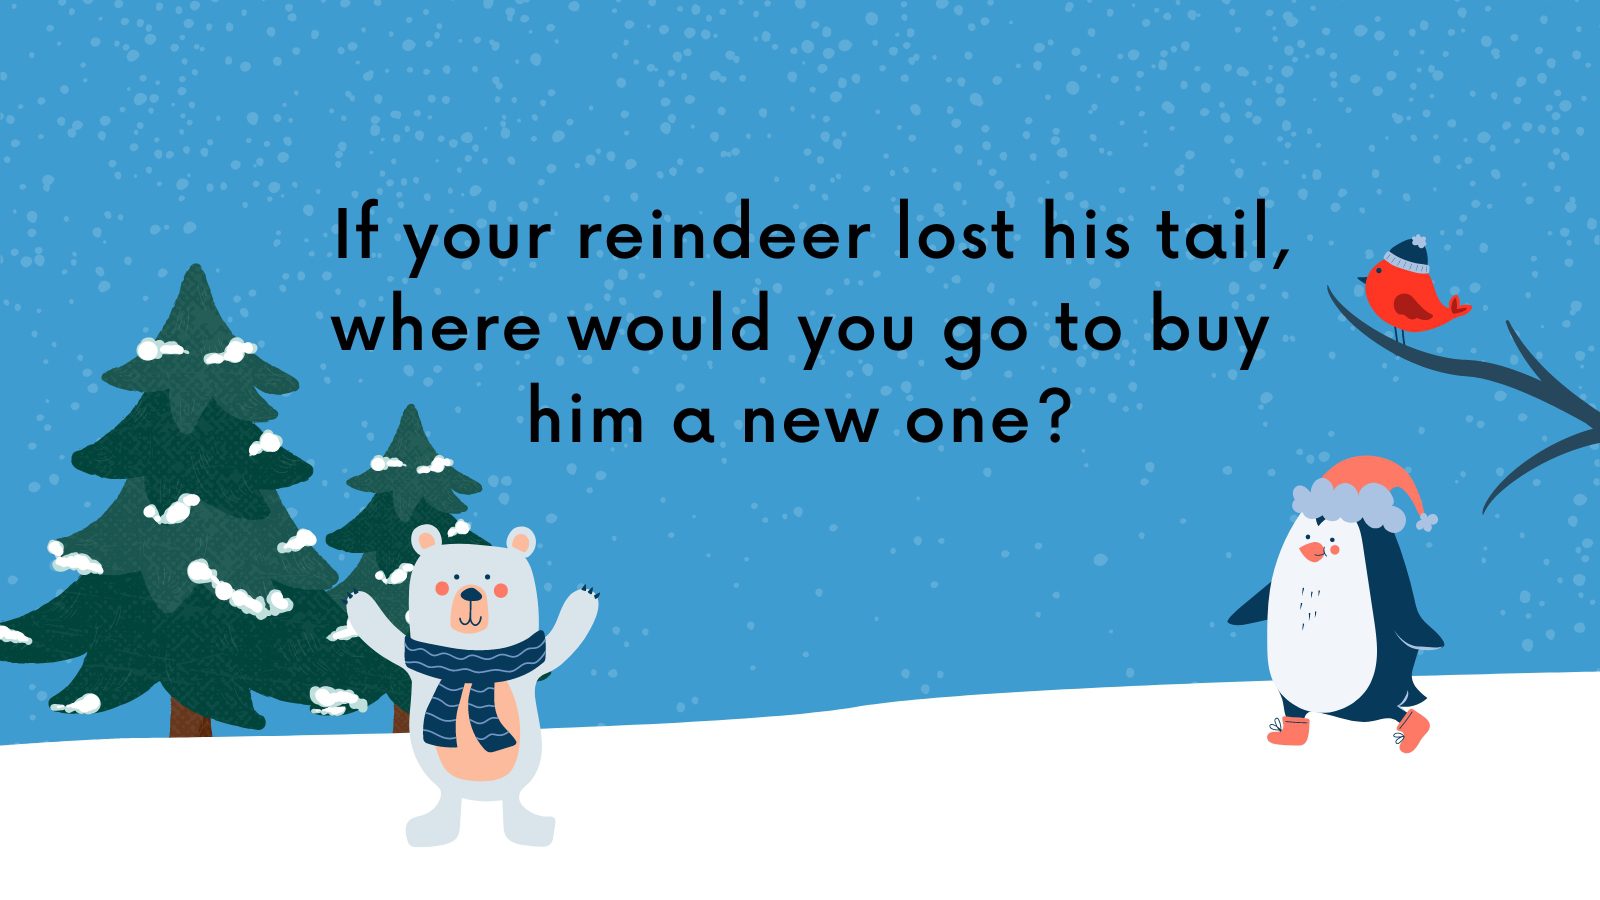 If your reindeer lost his tail, where would you go to buy him a new one?